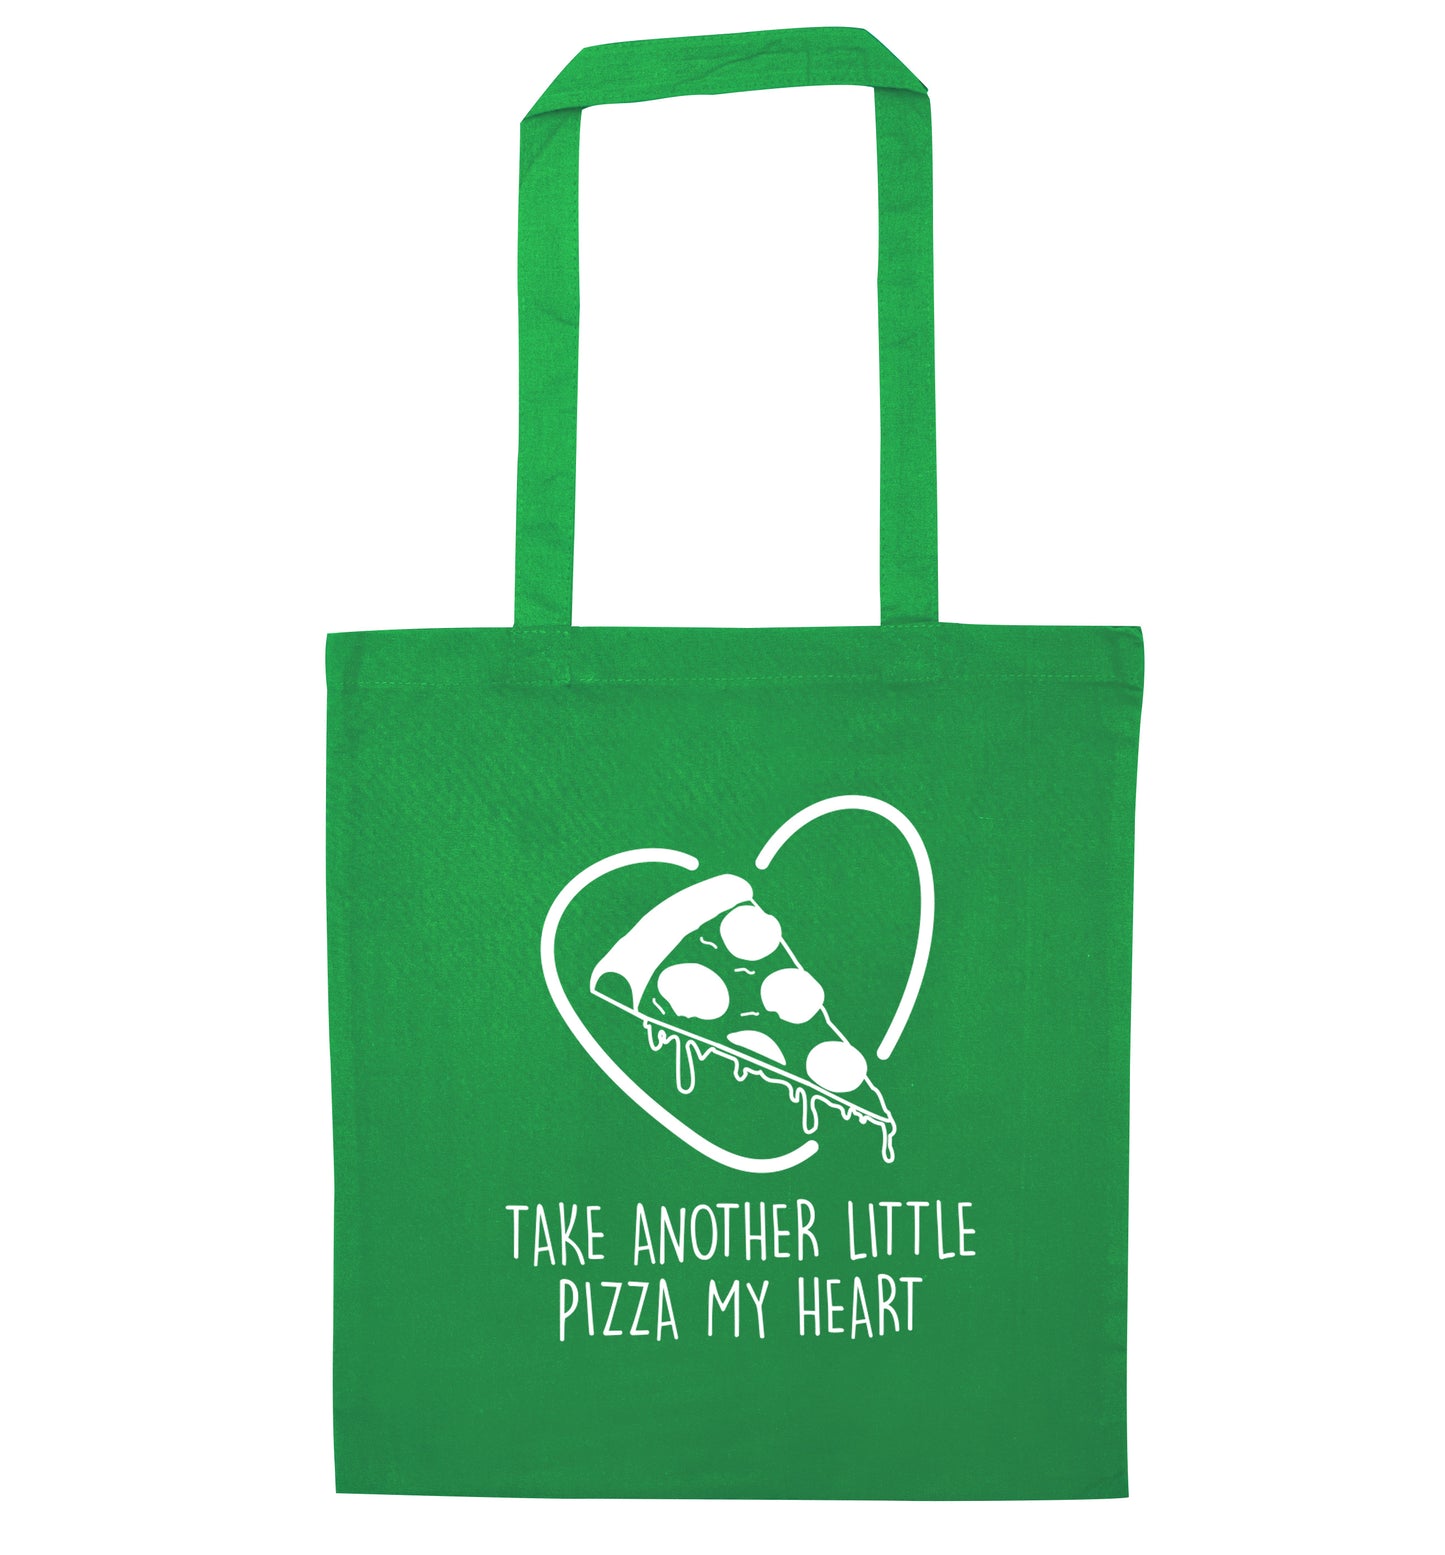 Take another little pizza my heart green tote bag